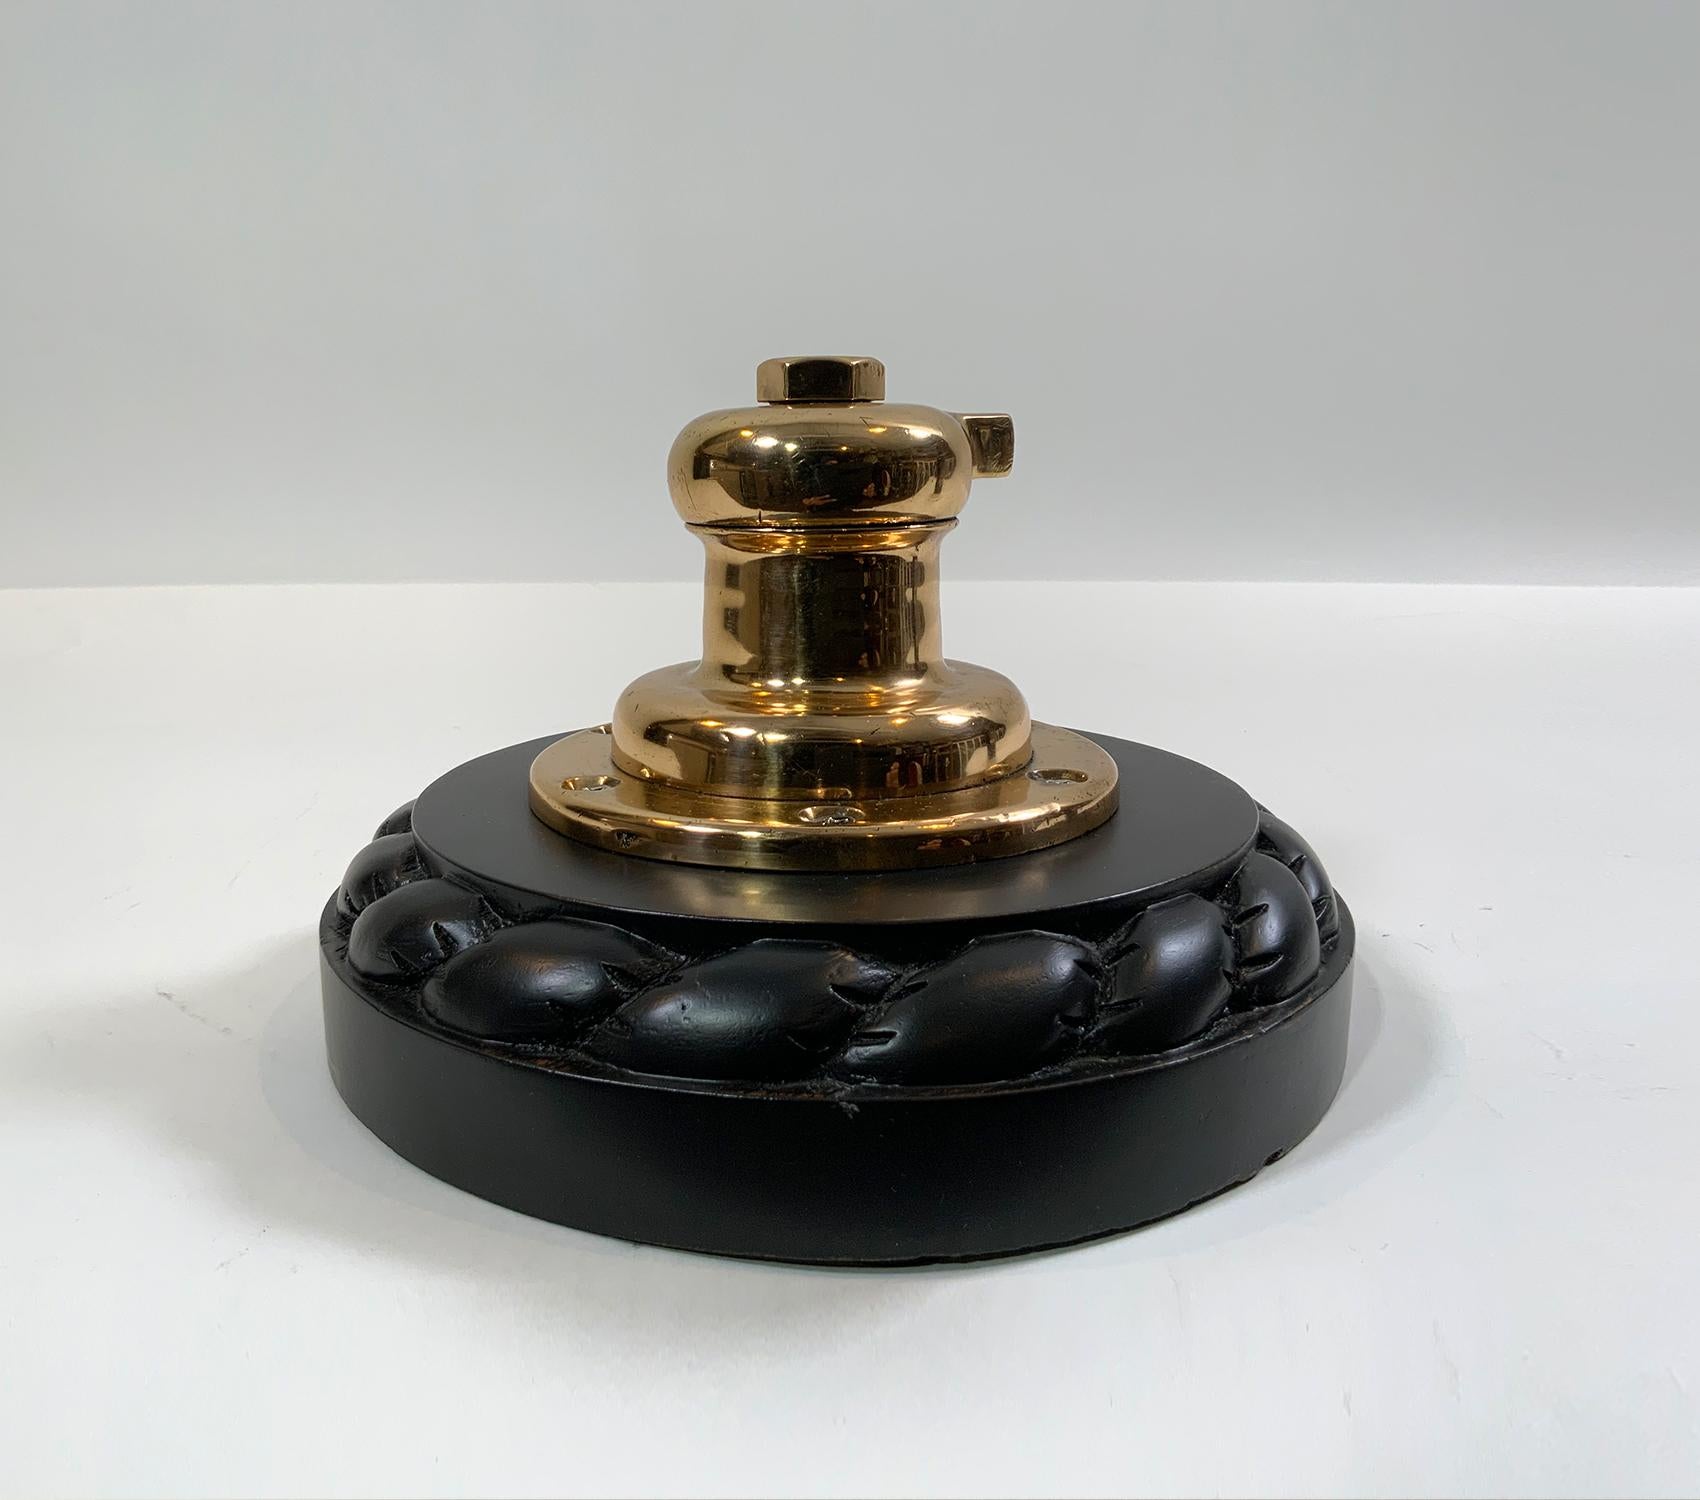 Yacht Winch mounted to a rope carved mahogany base. Polished and lacquered. 

Overall Dimensions: 7